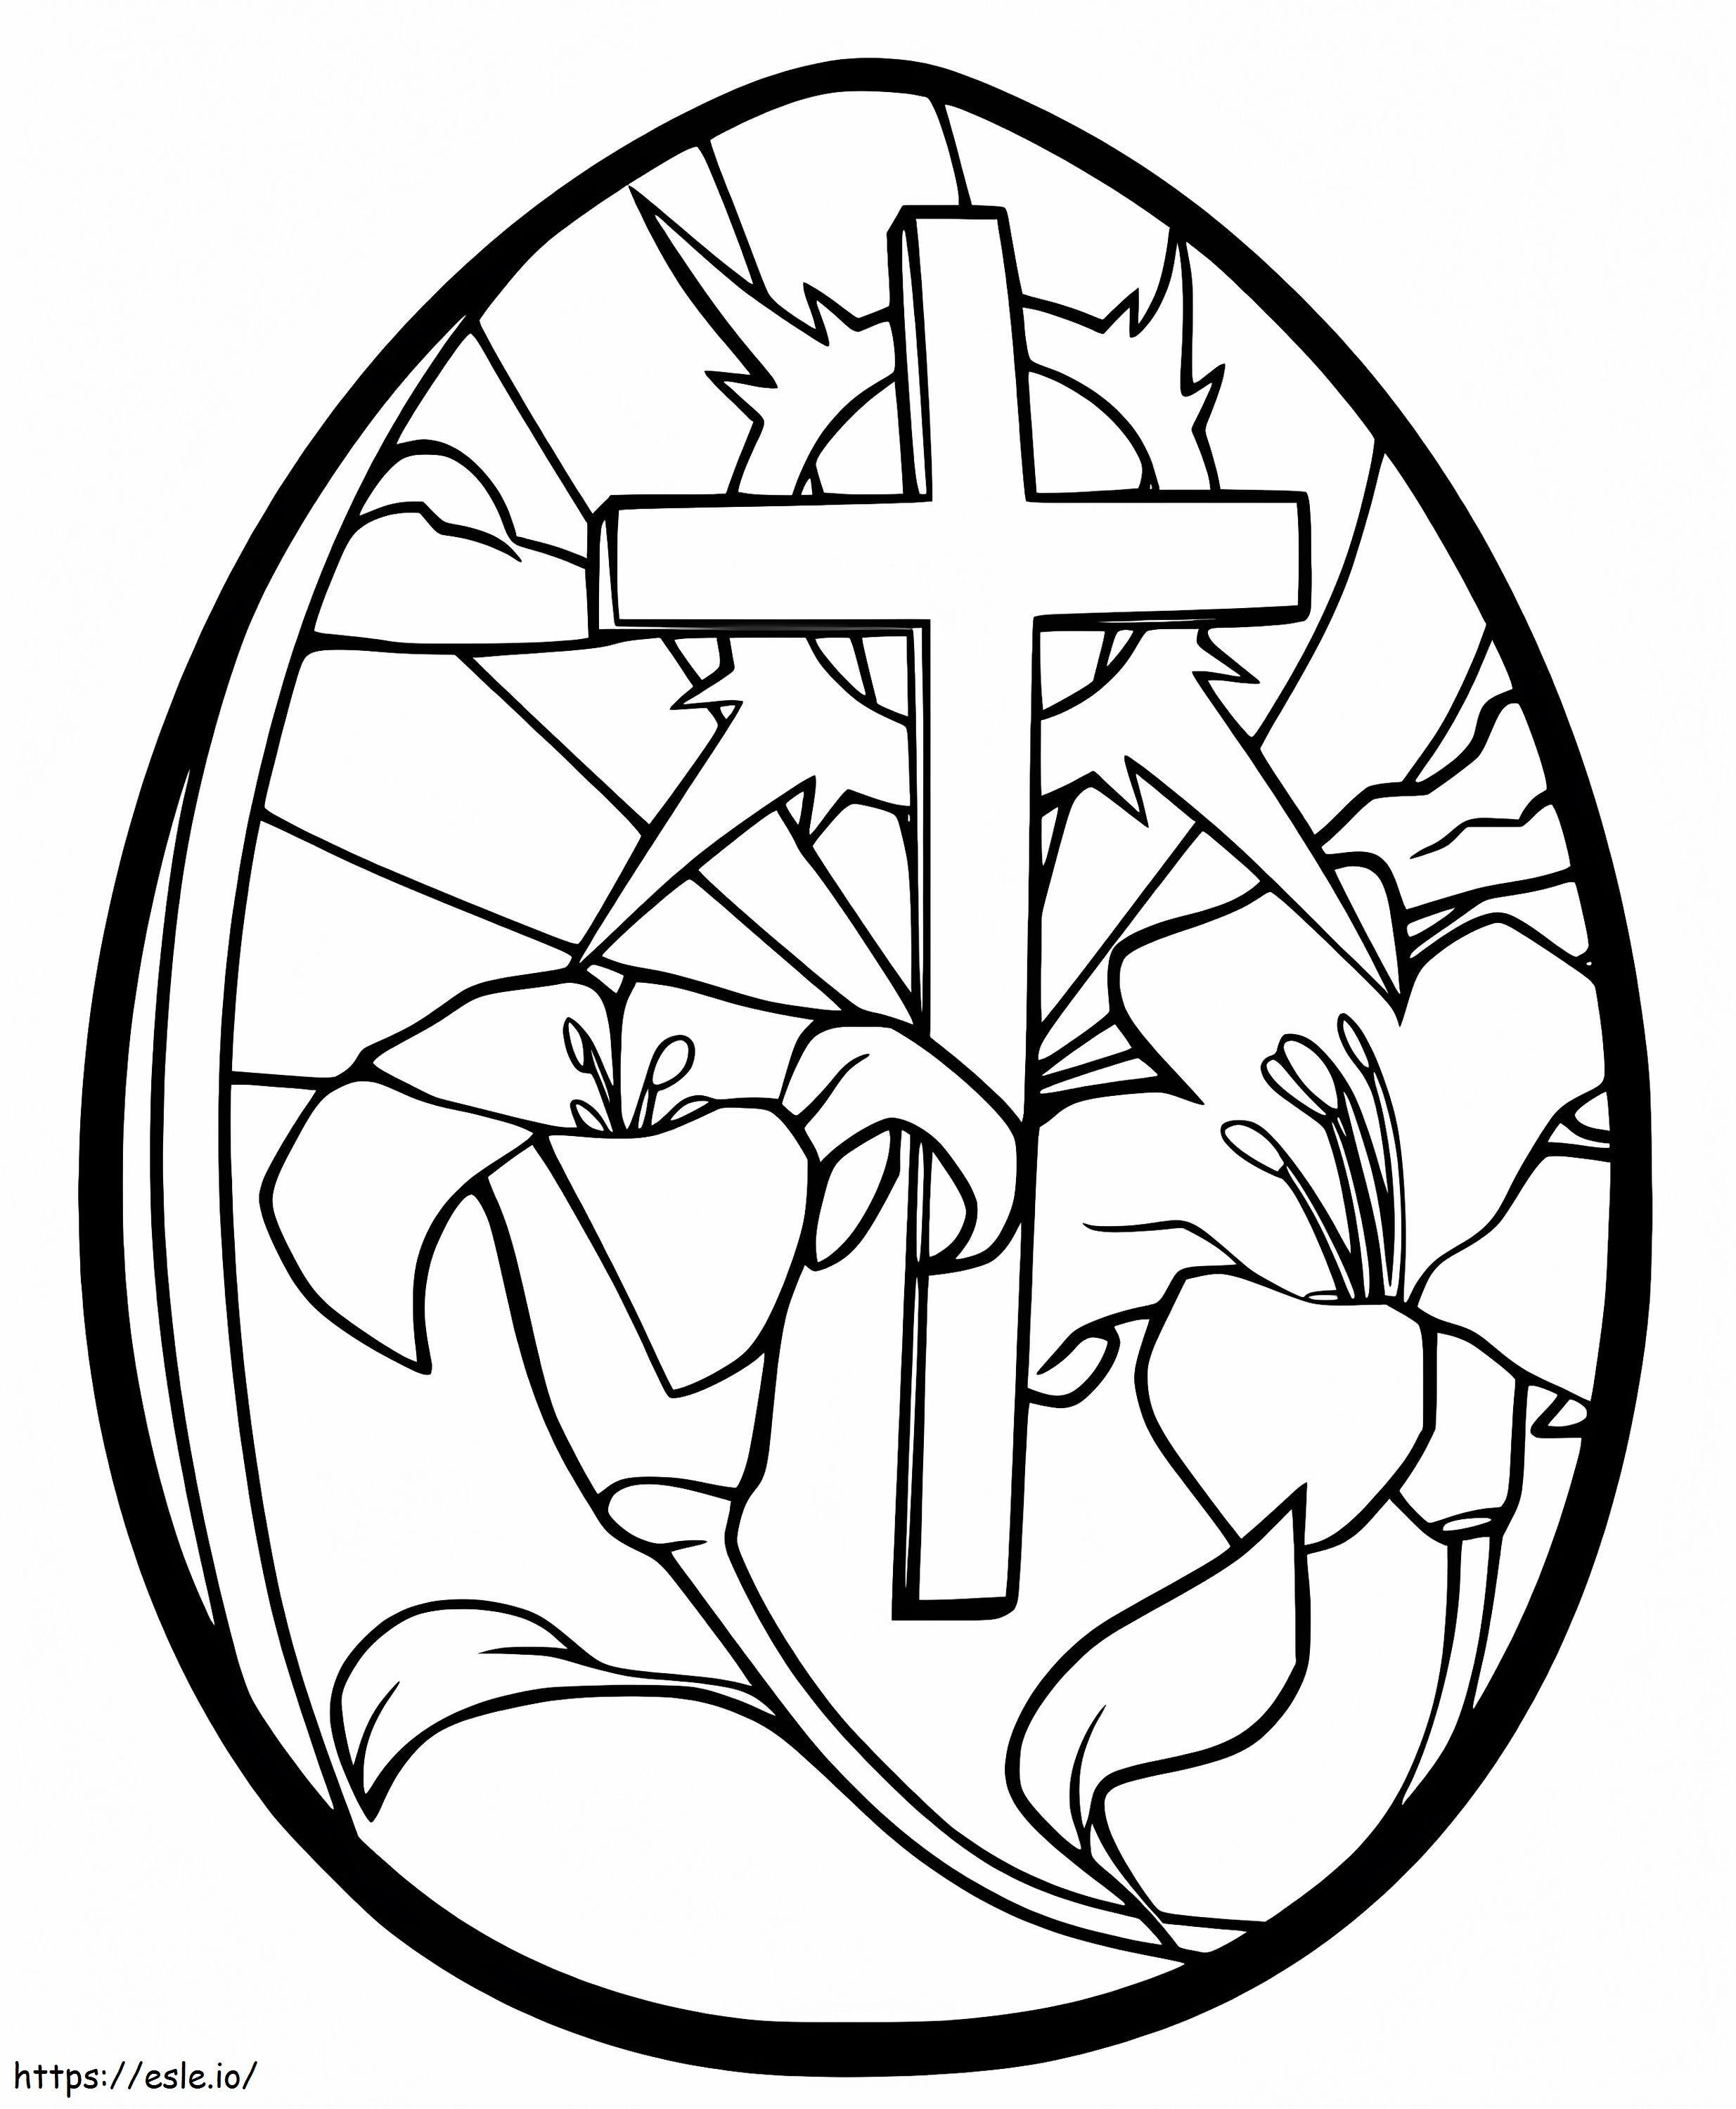 Easter Egg With Cross coloring page